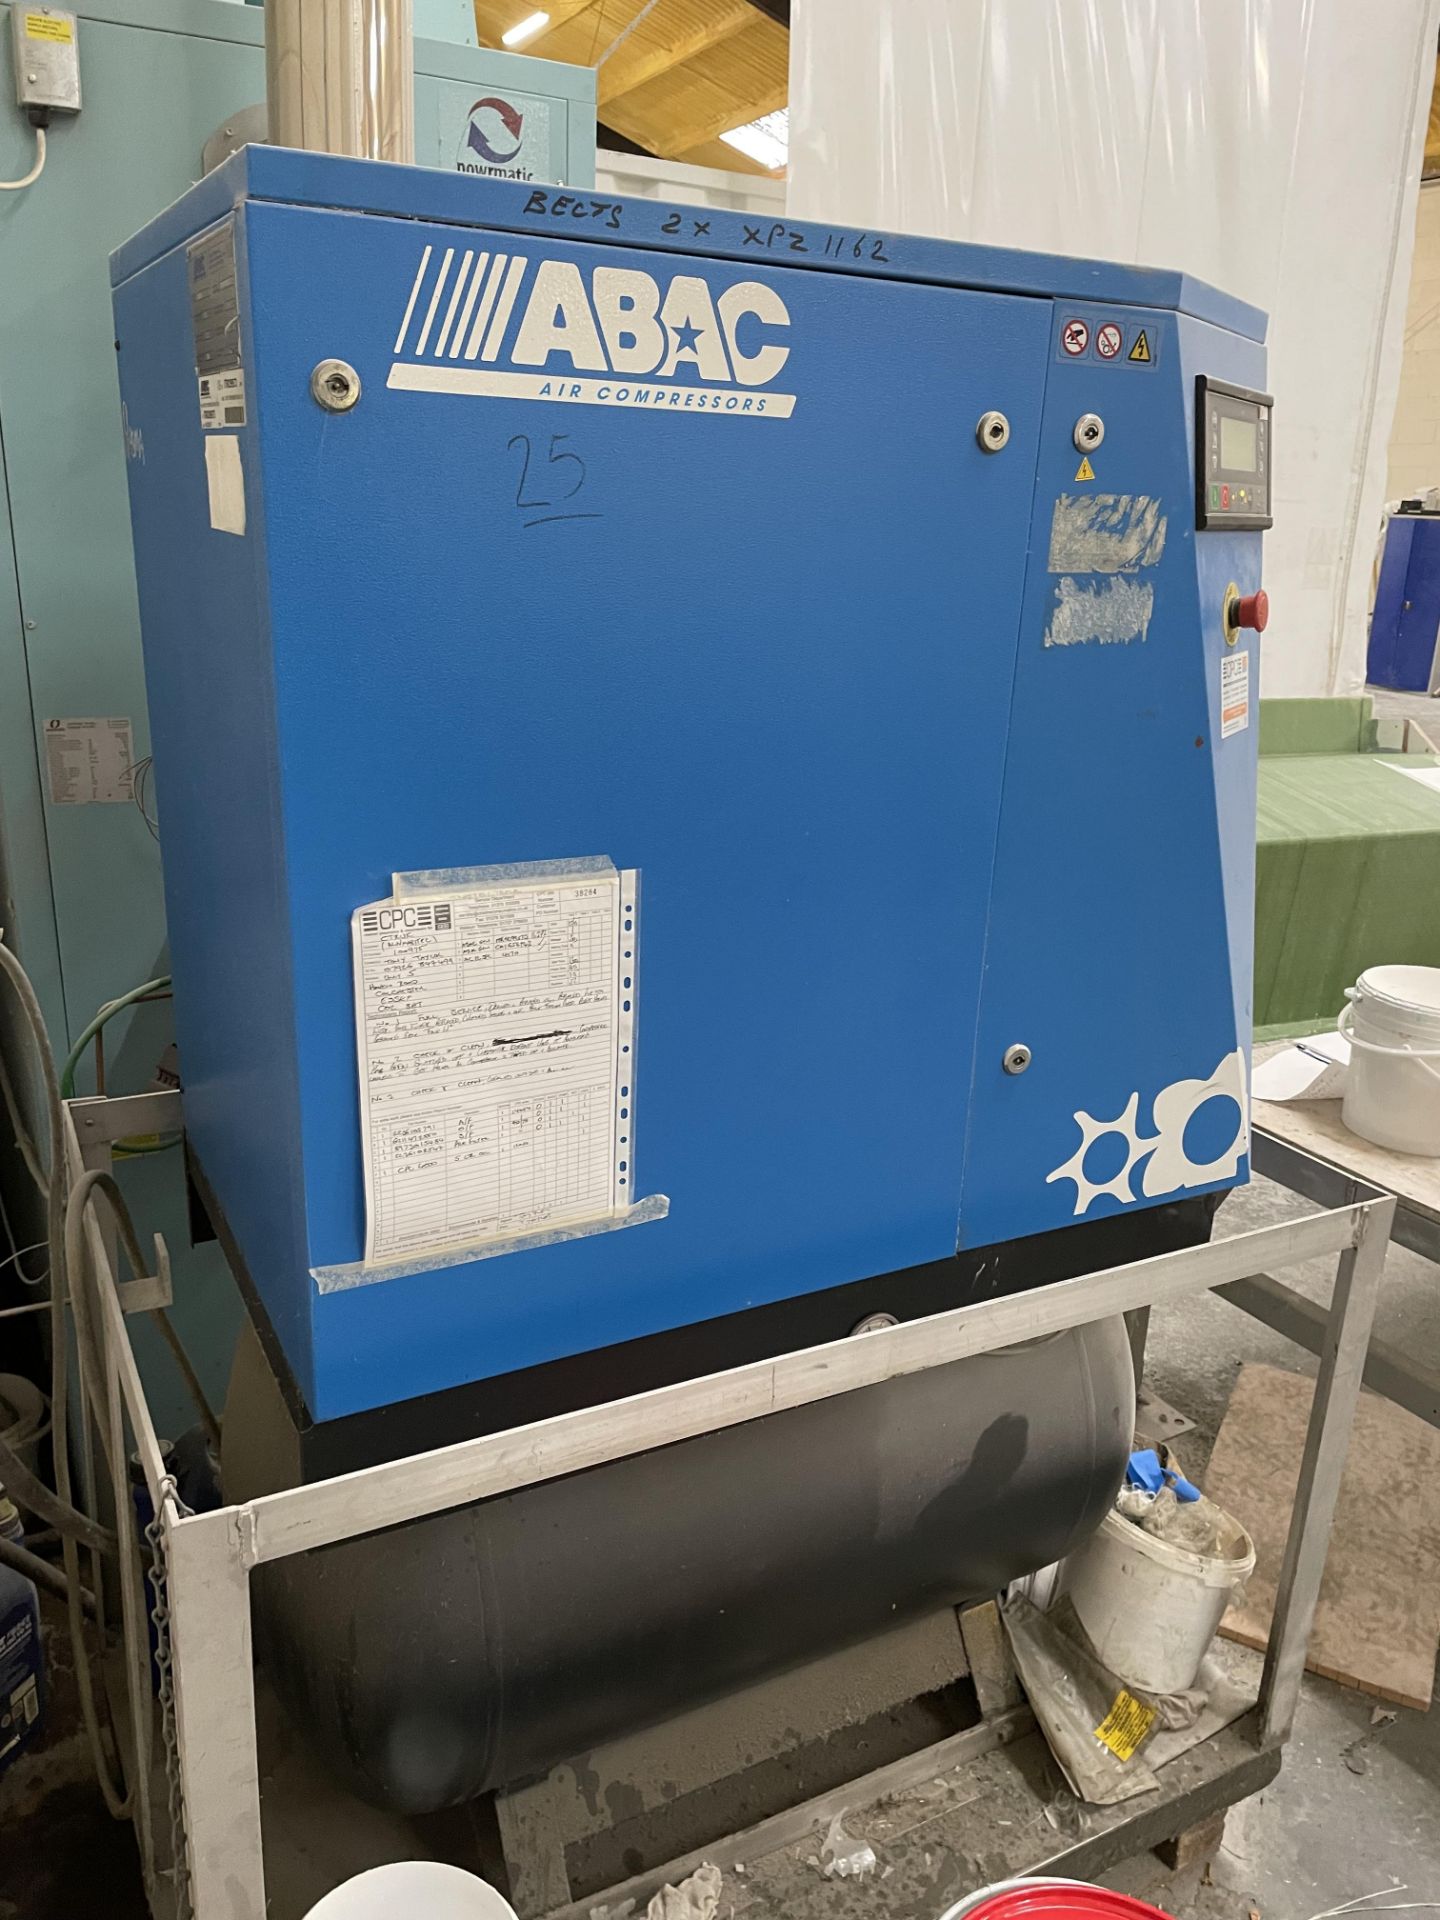 2010 ABAC Genesis 7.5kW 8-Bar Air Compressor S/No. ITR0299573, 3-Phase - Image 2 of 5